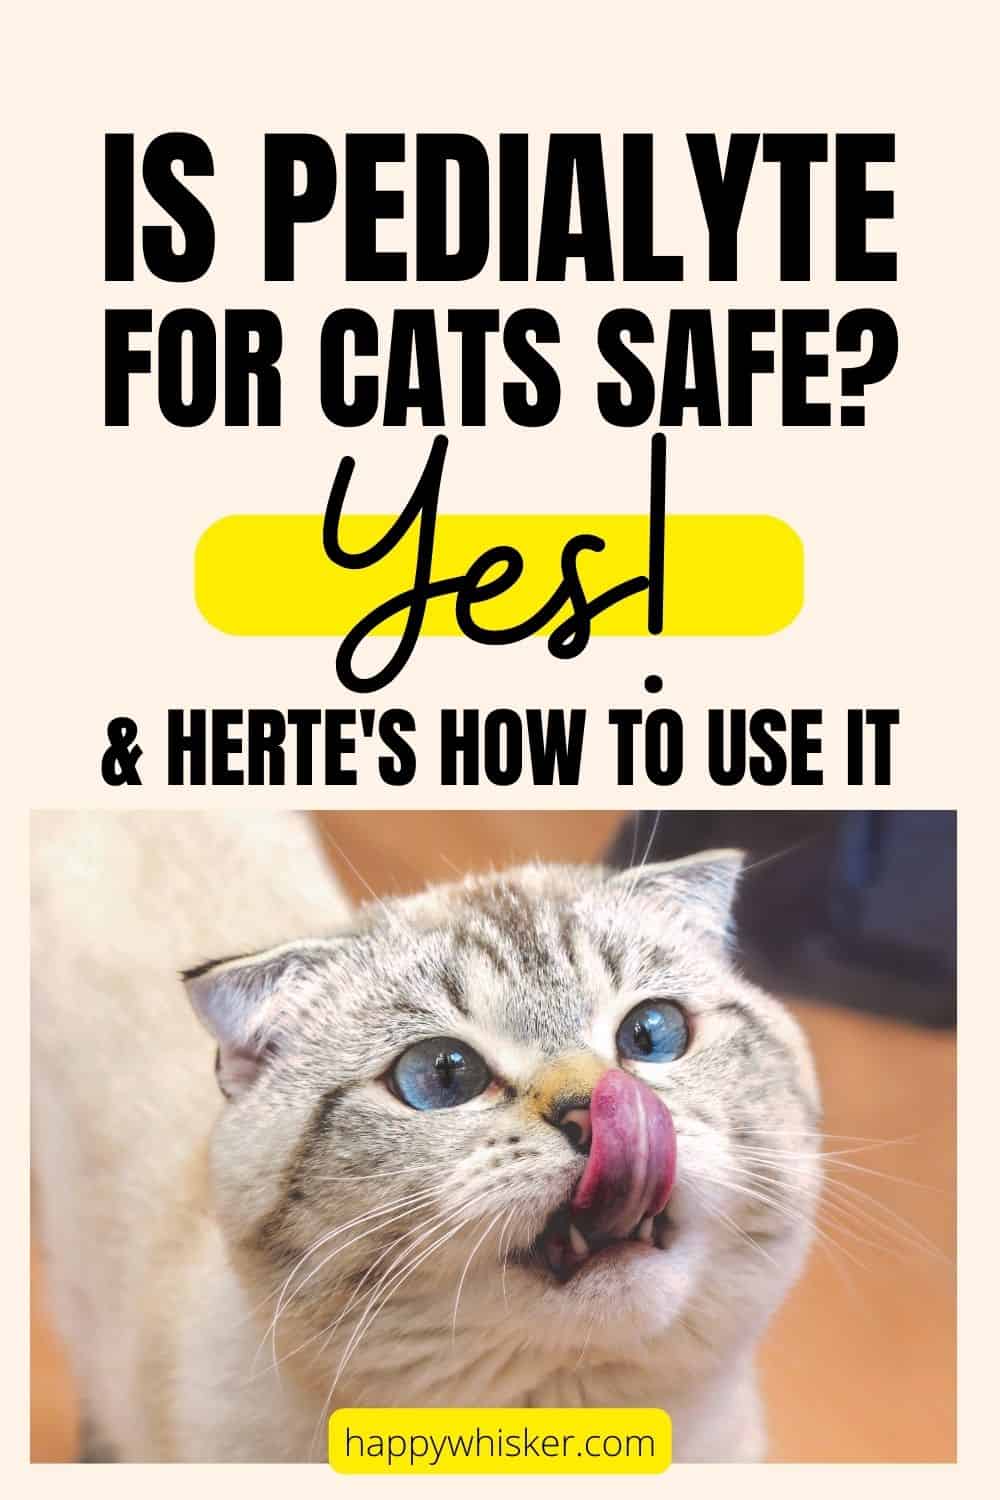 Is Pedialyte For Cats Safe Yes! & Herte's How To Use It Pinteres